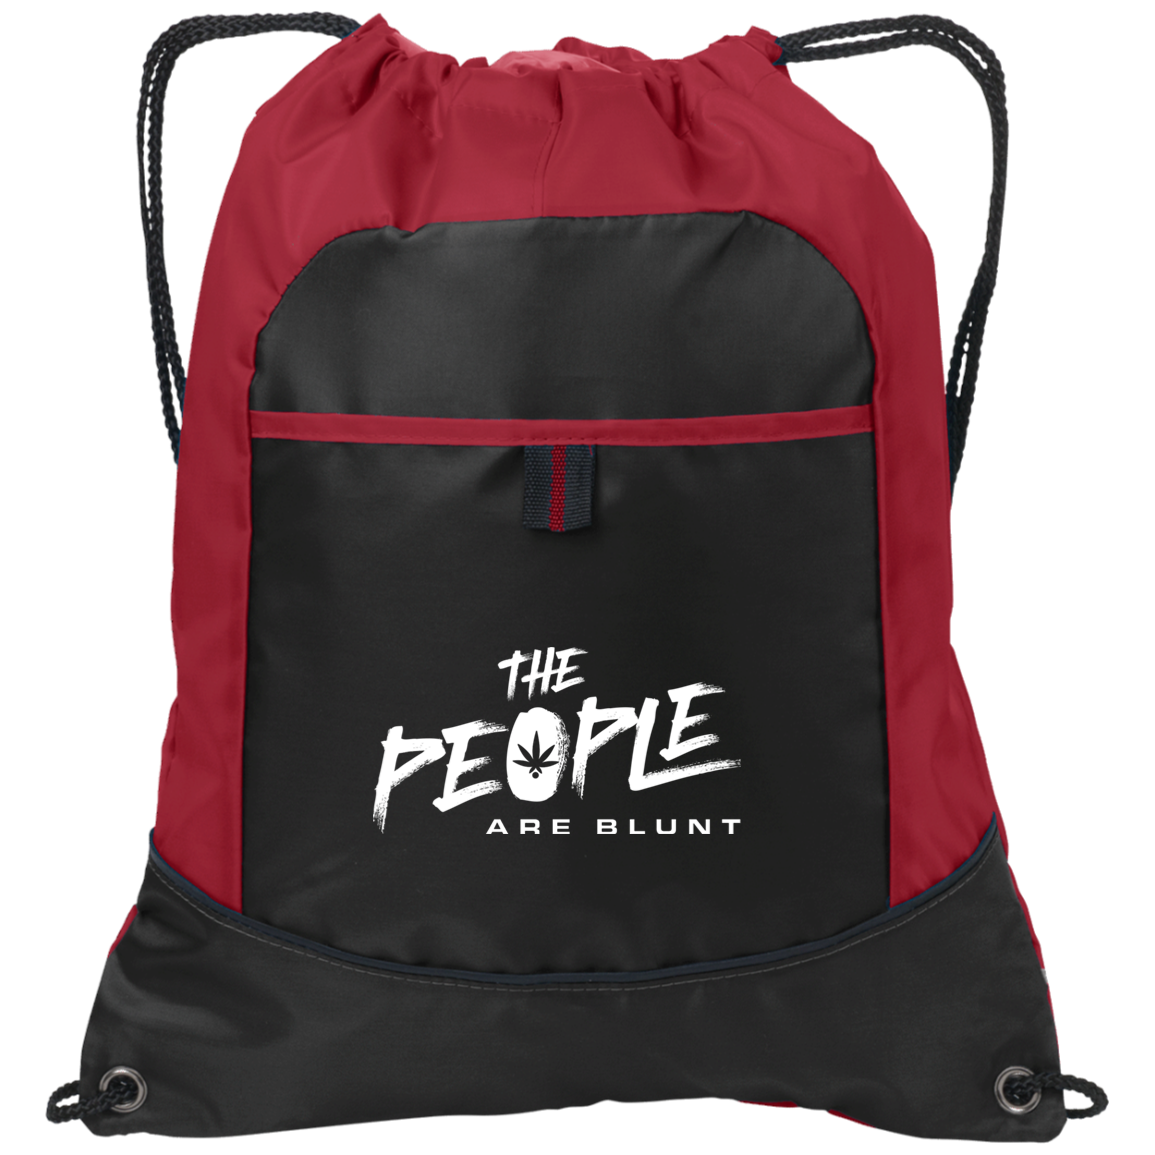 The People's (B) Pocket Cinch Pack